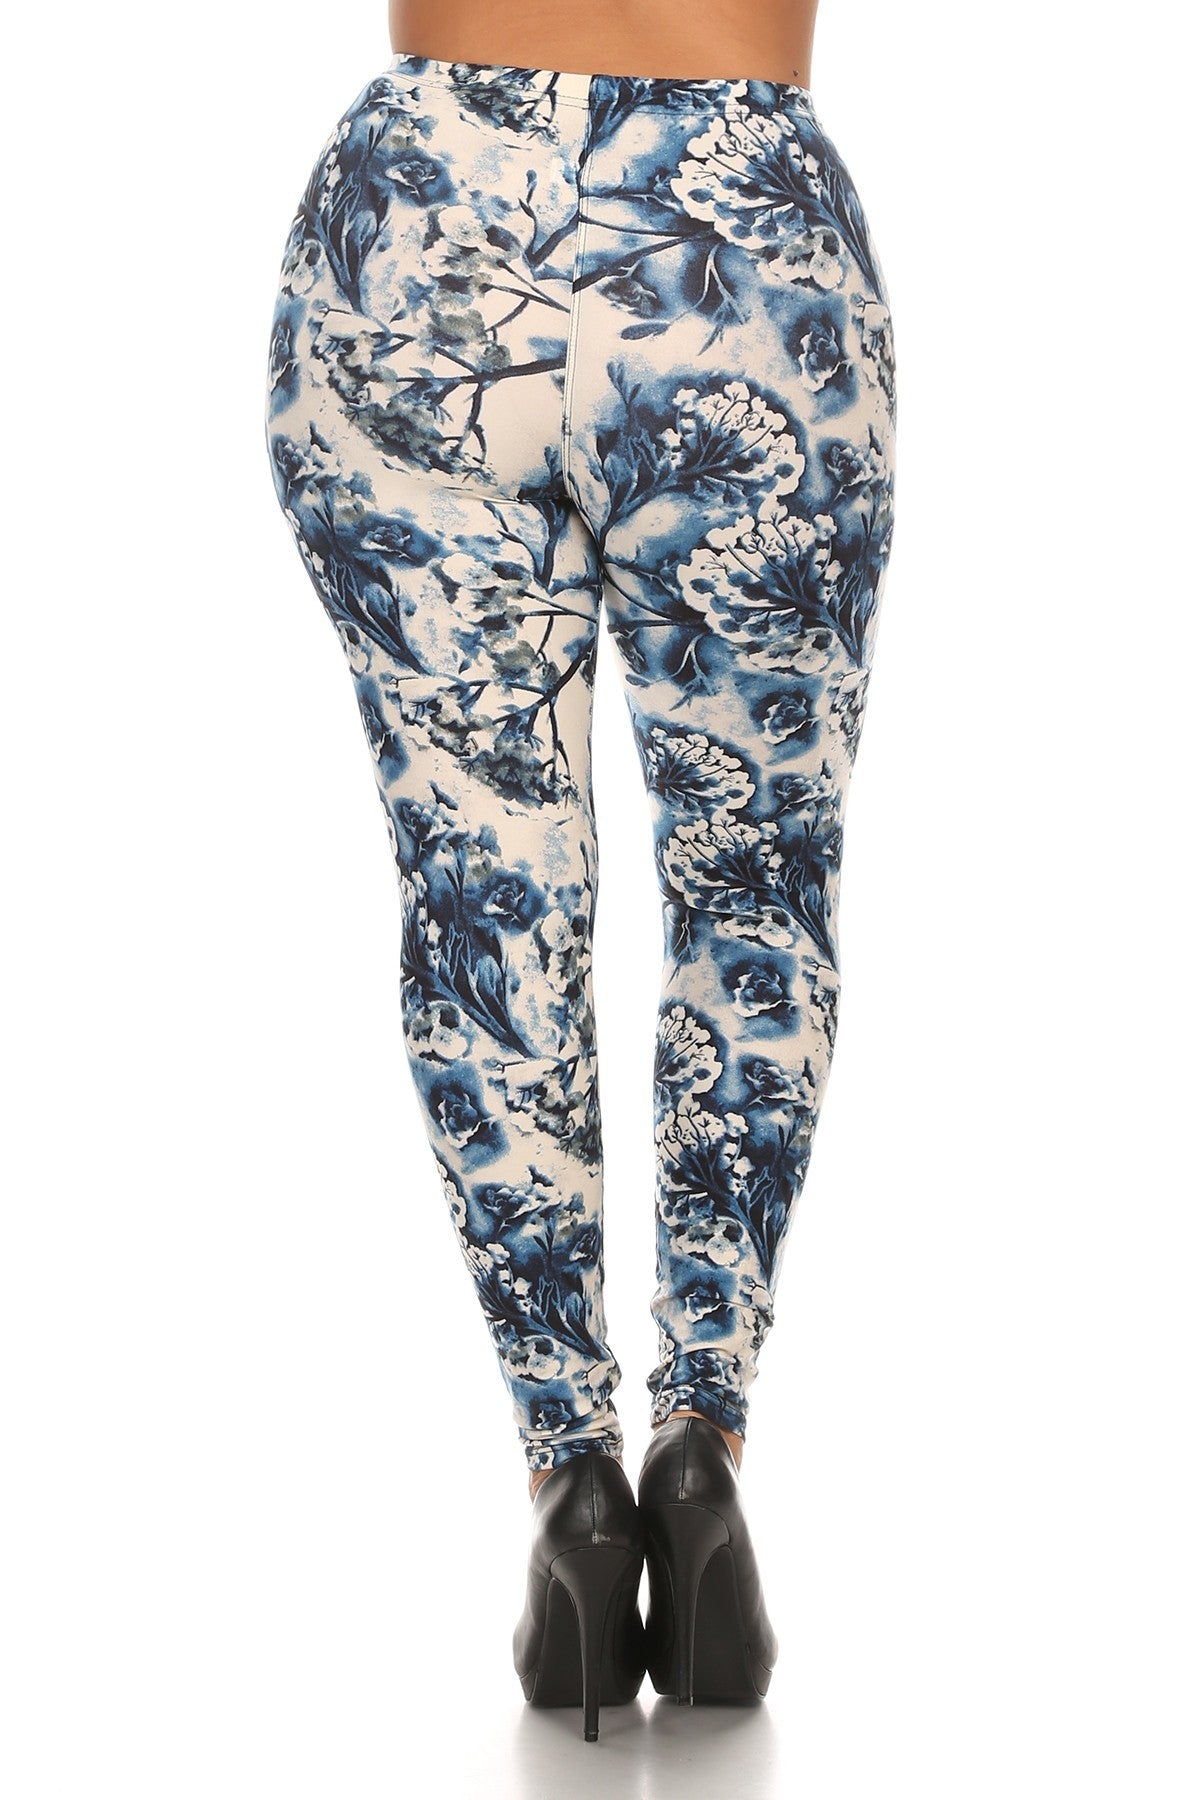 Plus Size Floral Print, Full Length Leggings In A Slim Fitting Style With A Banded High Waist - Tigbuls Variety Fashion